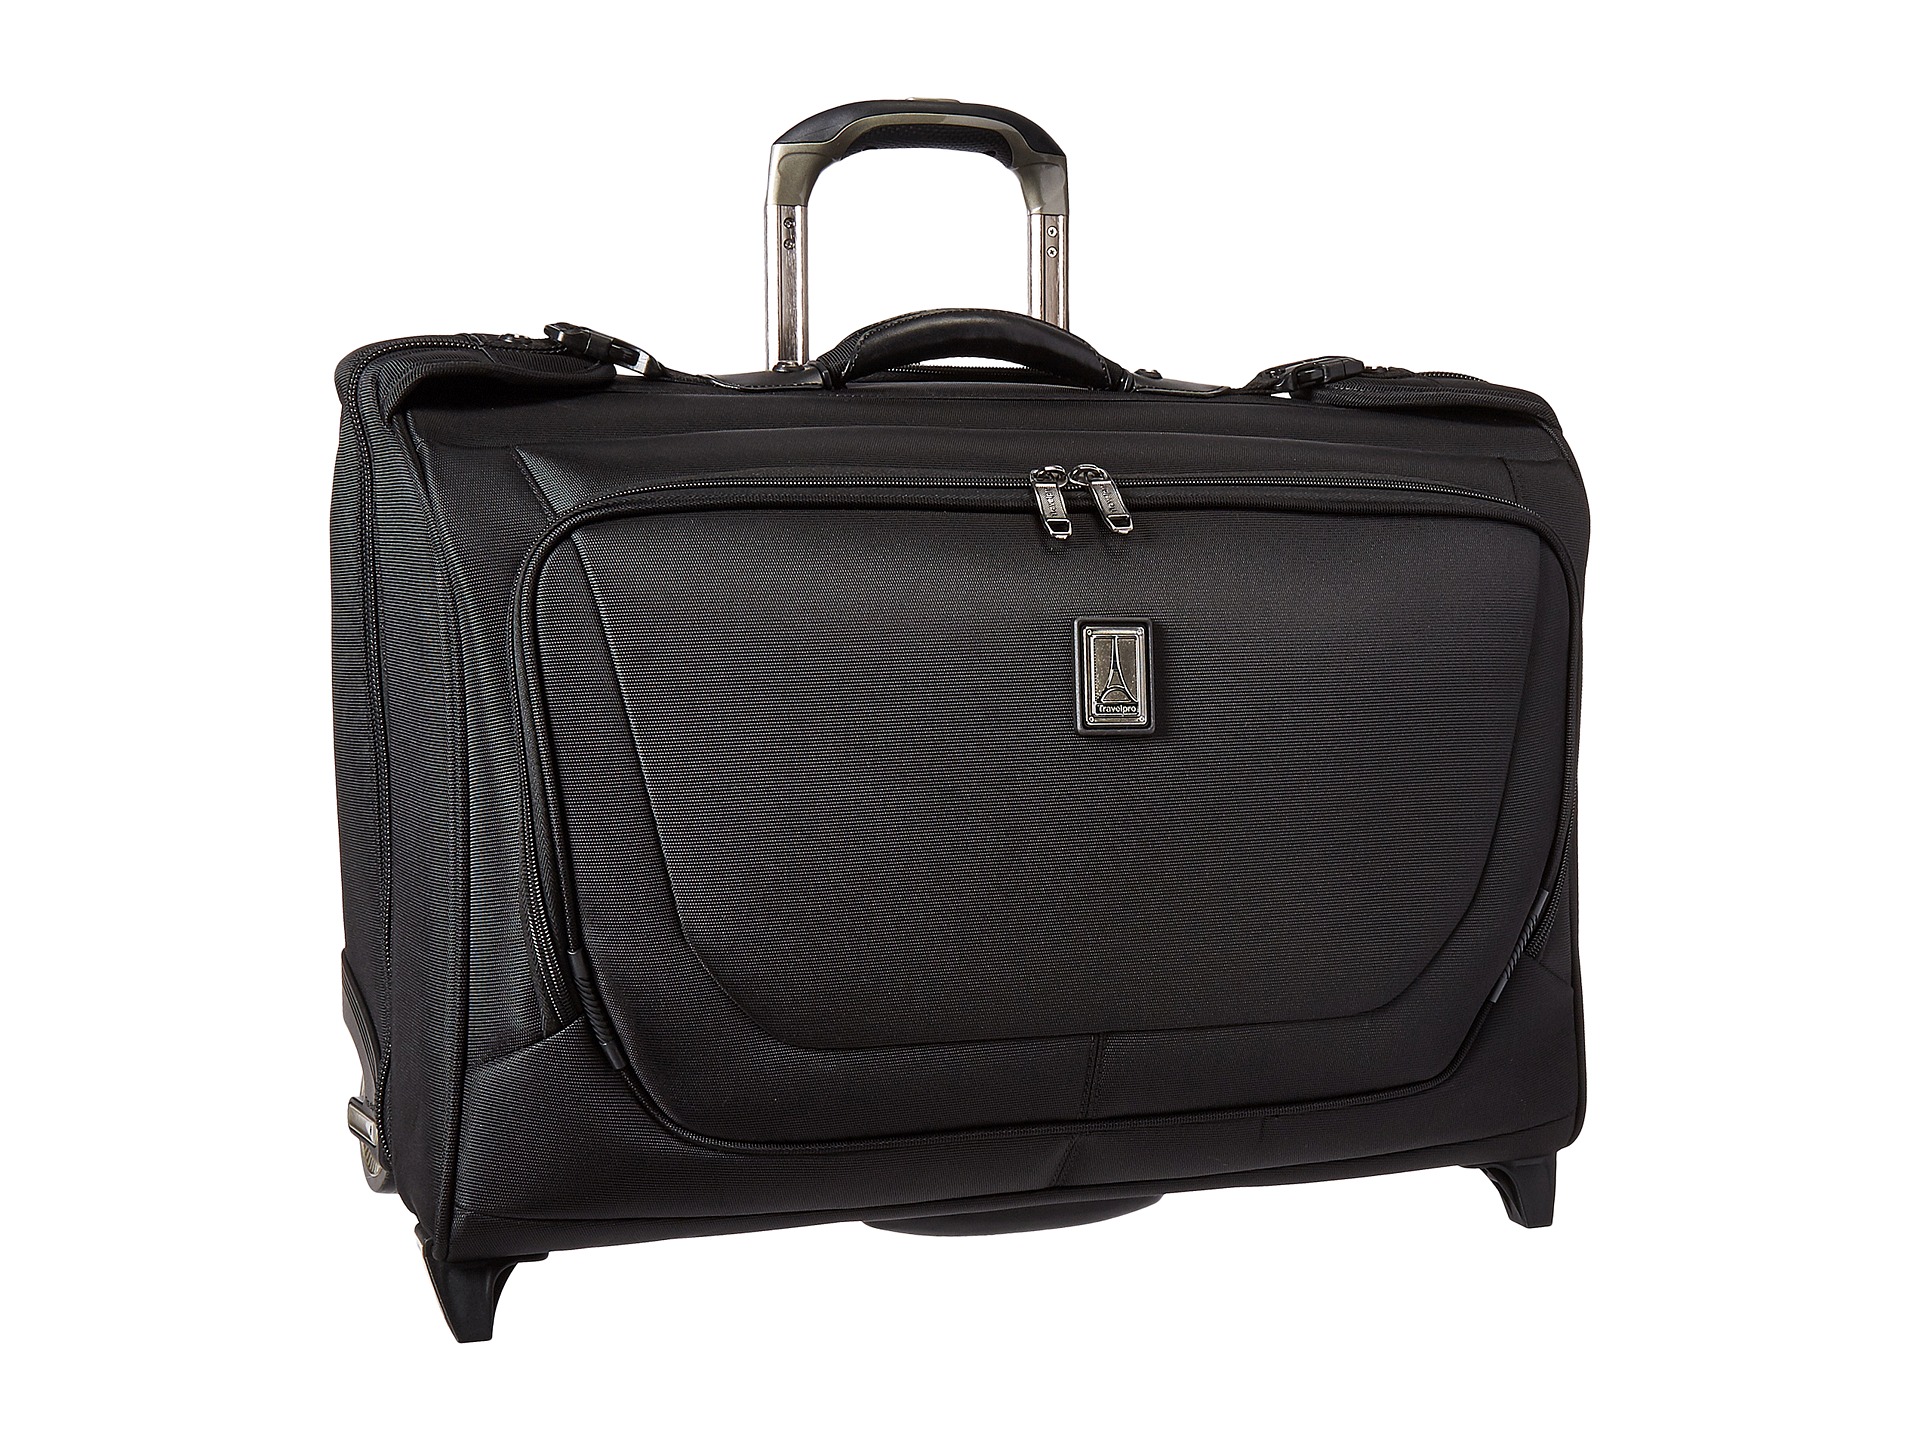 Travelpro Crew 11 - Carry-On Rolling Garment Bag at 0